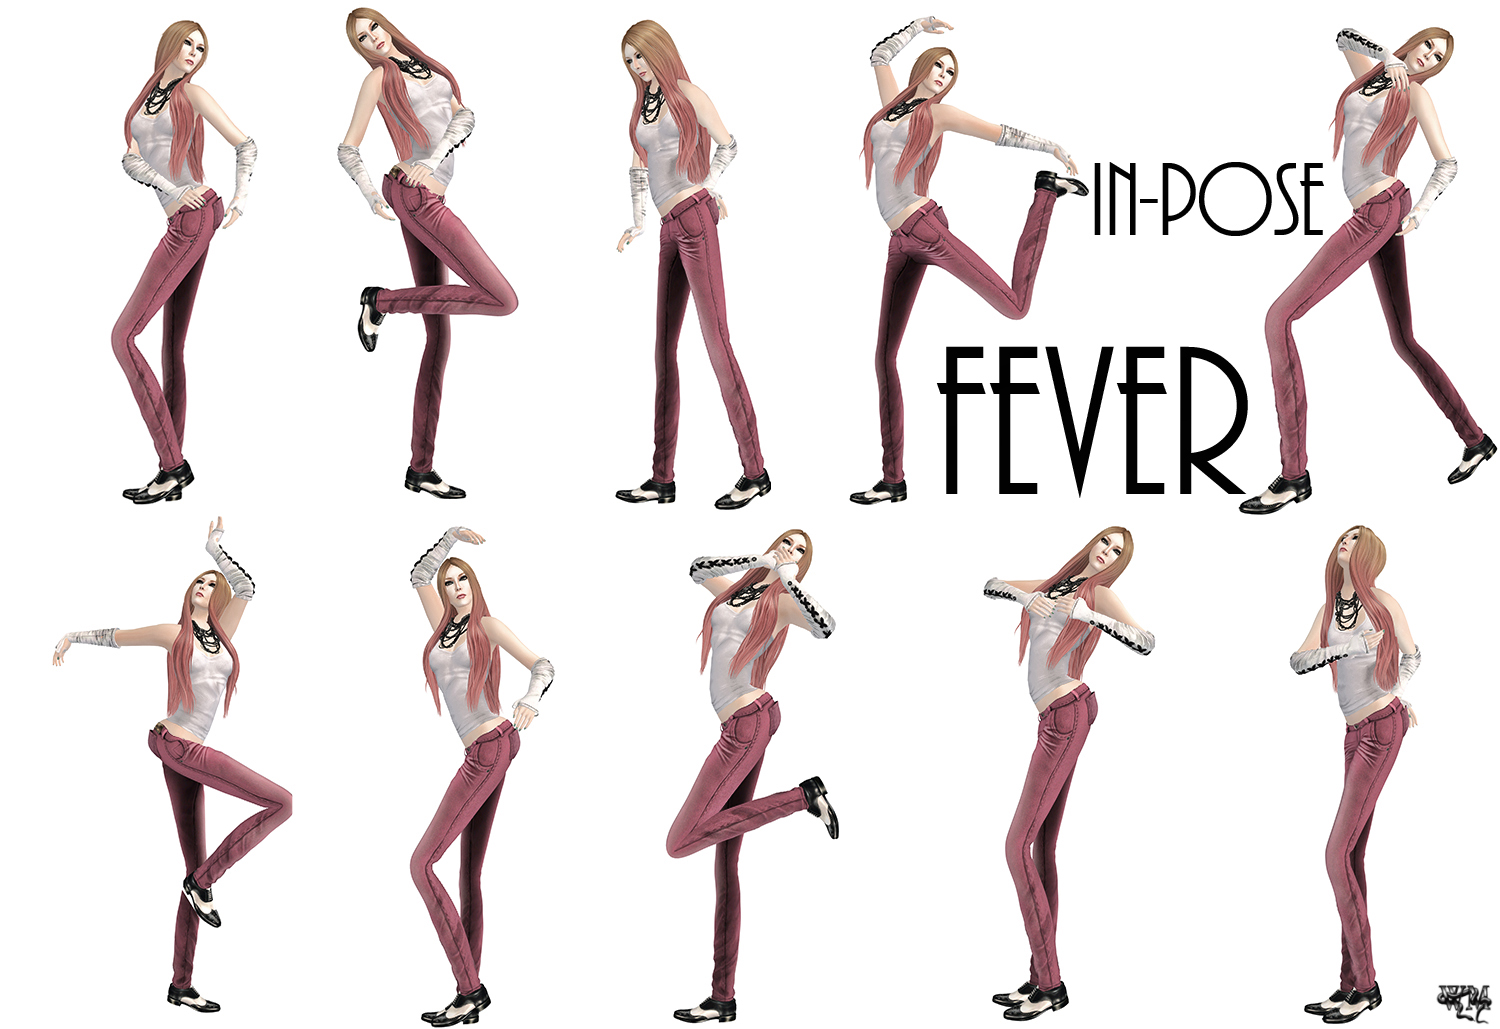 in-pose - fever